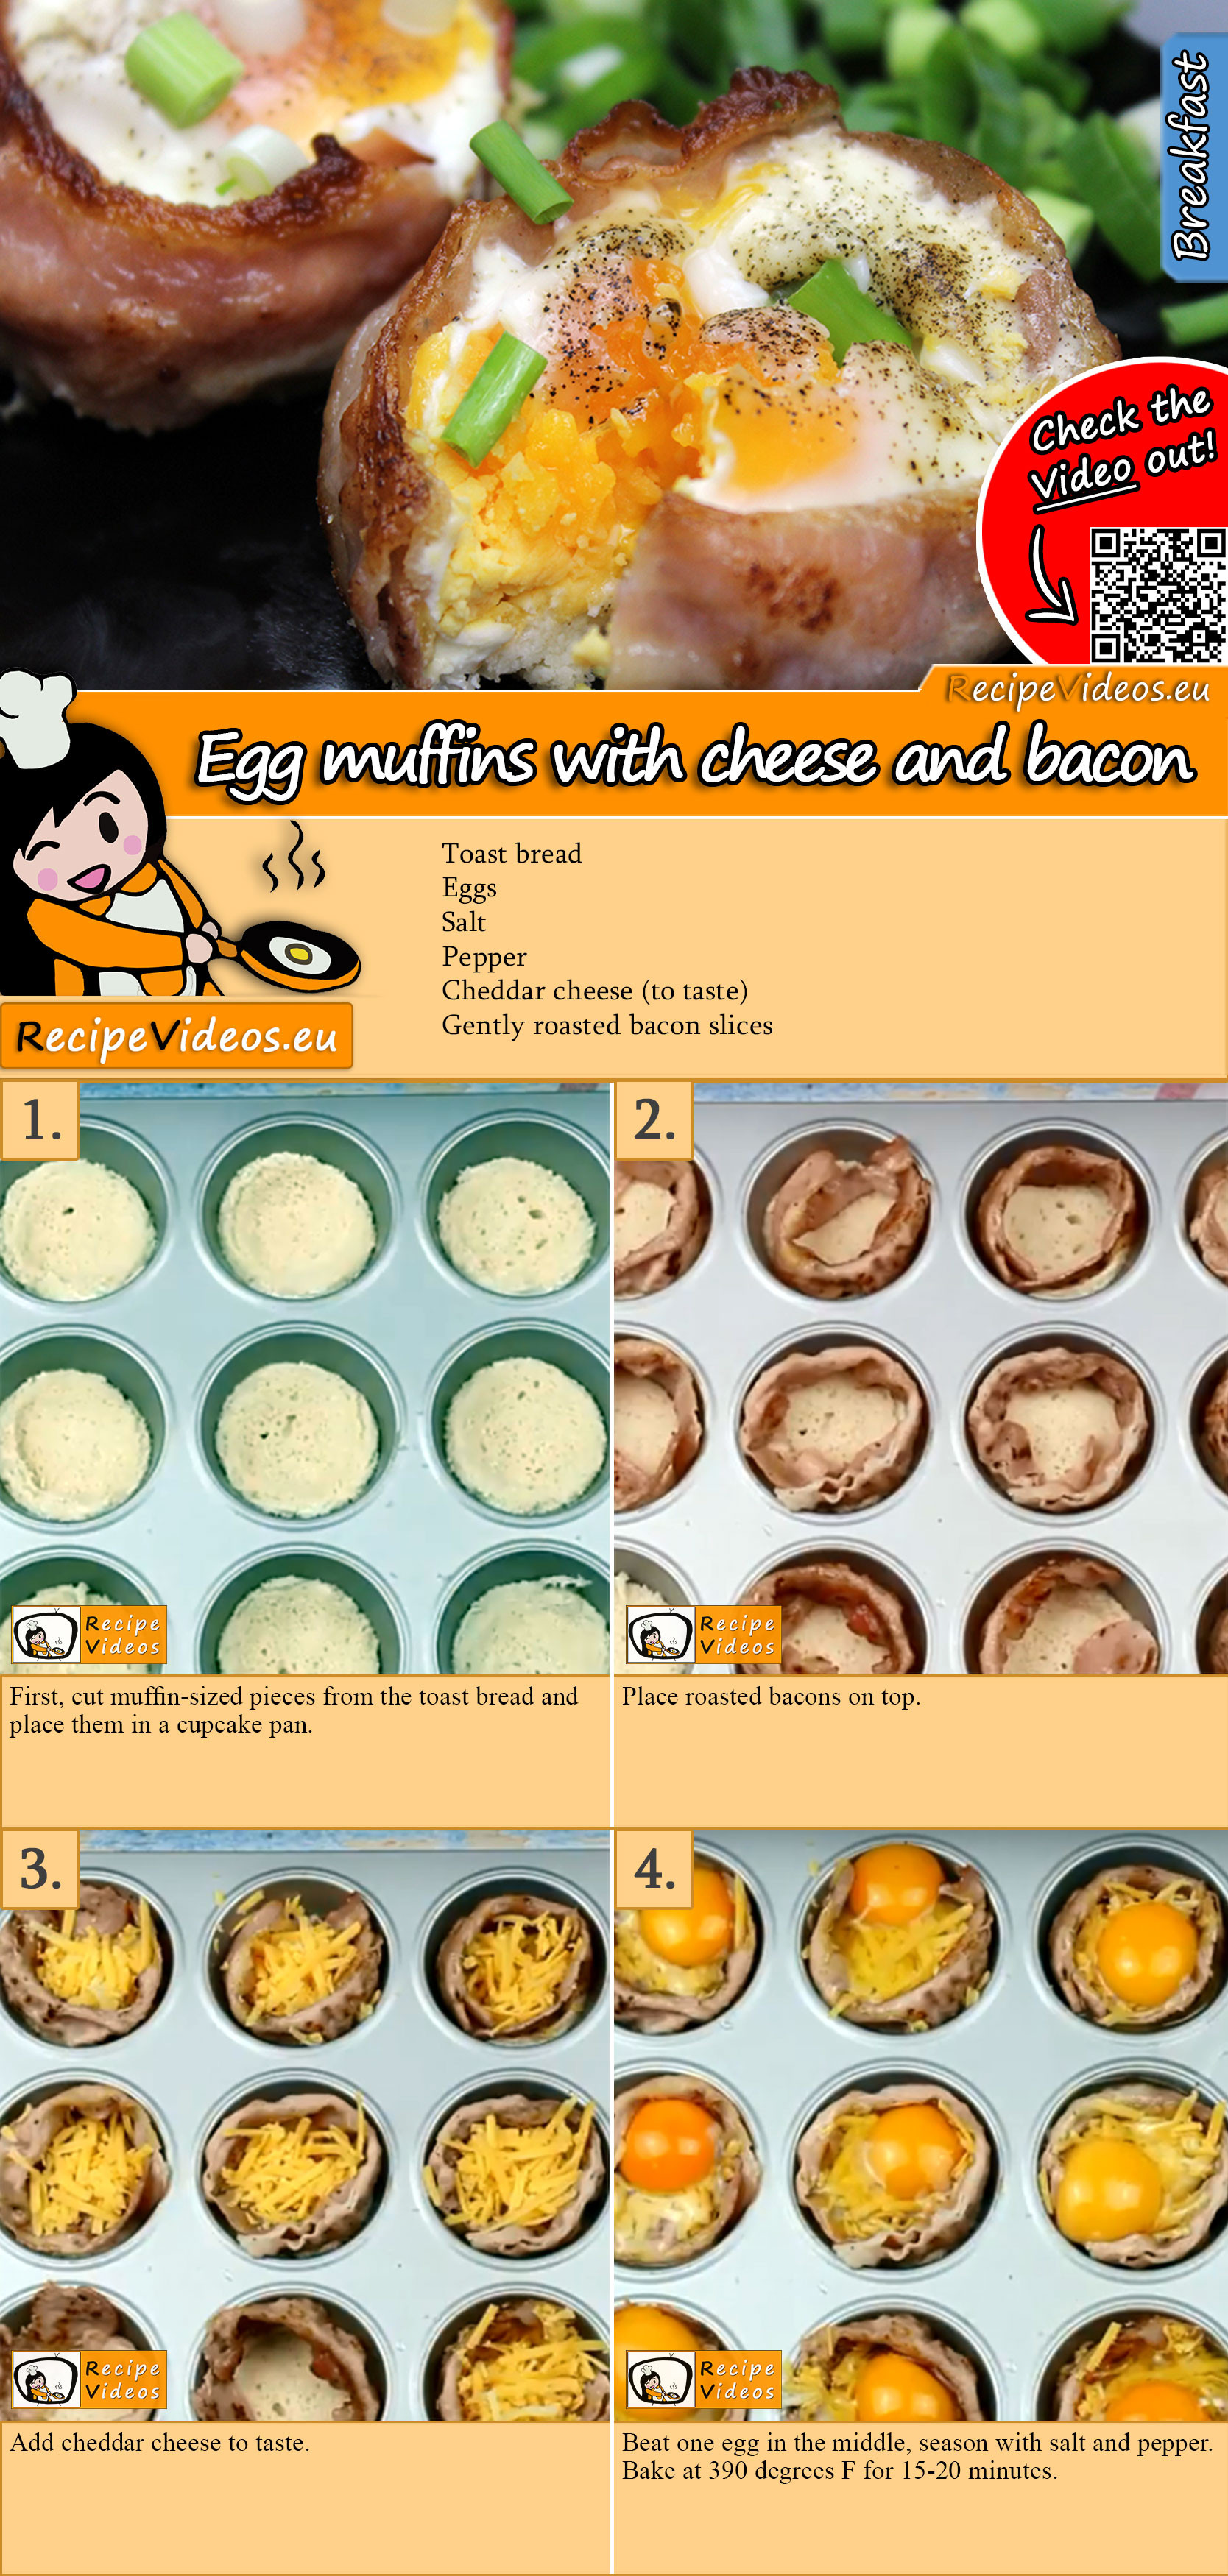 Egg muffins with cheese and bacon recipe with video